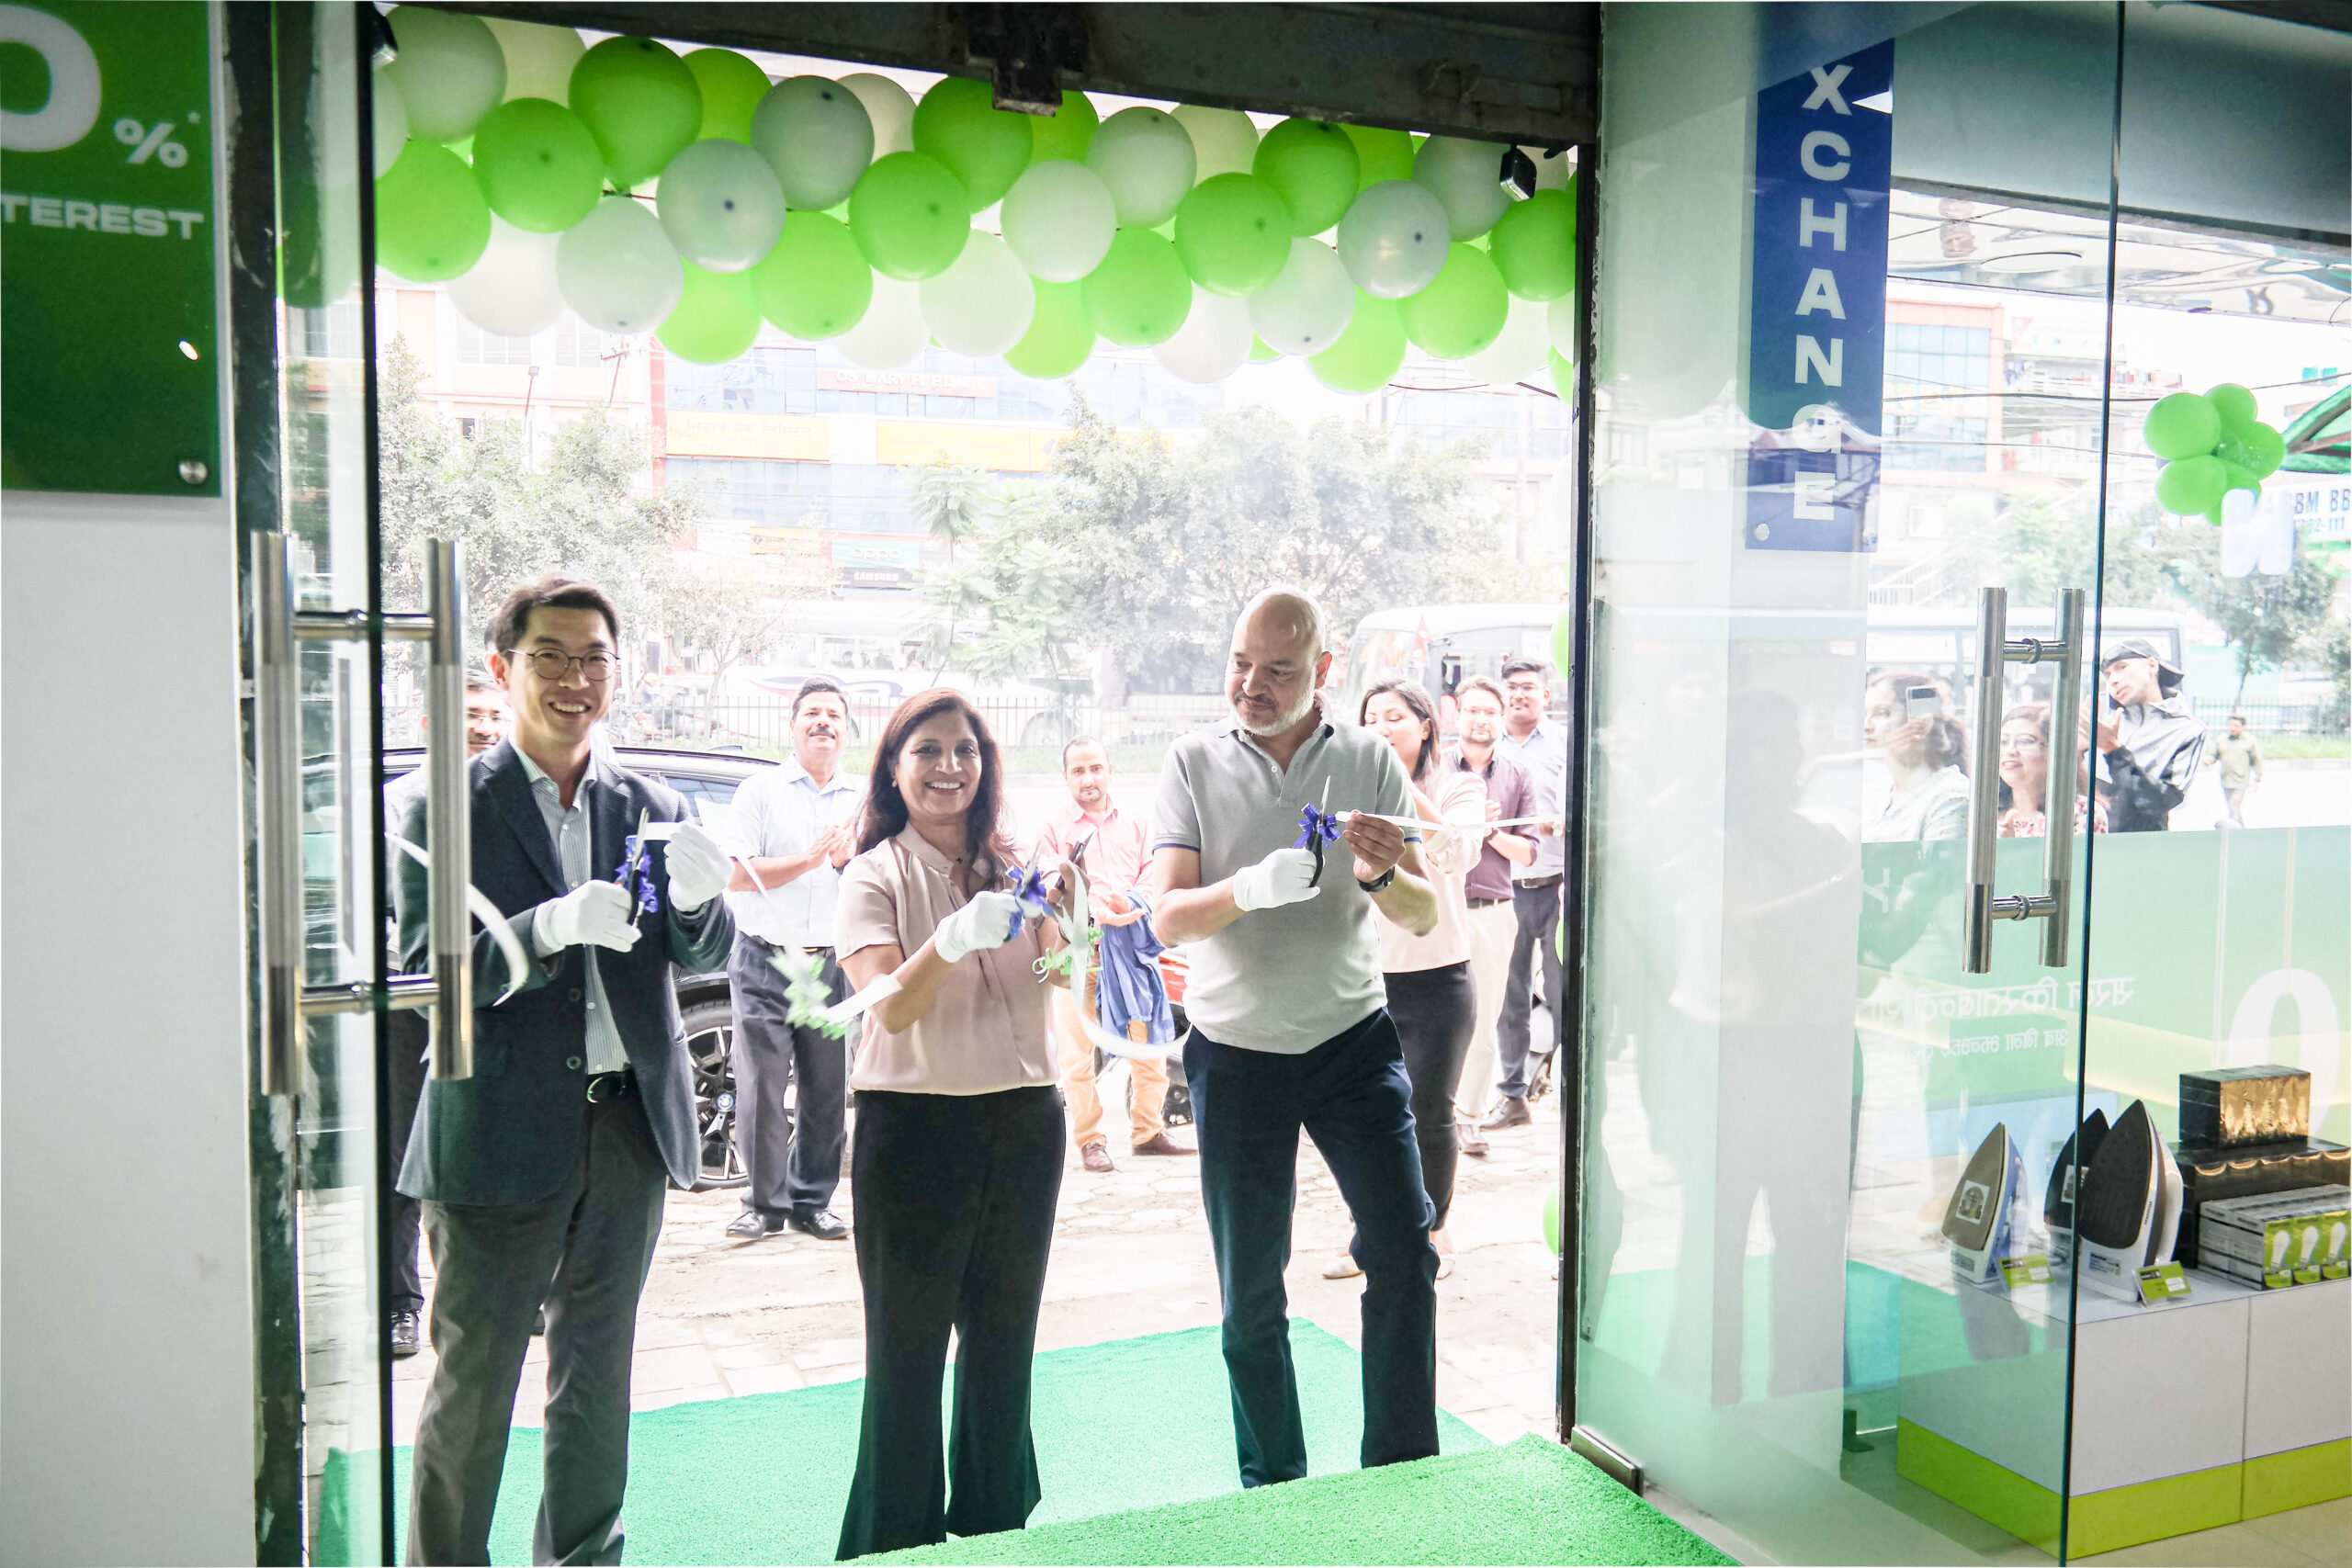 SwitchOn Retail expands reach with new outlet opening in Gatthaghar chowk